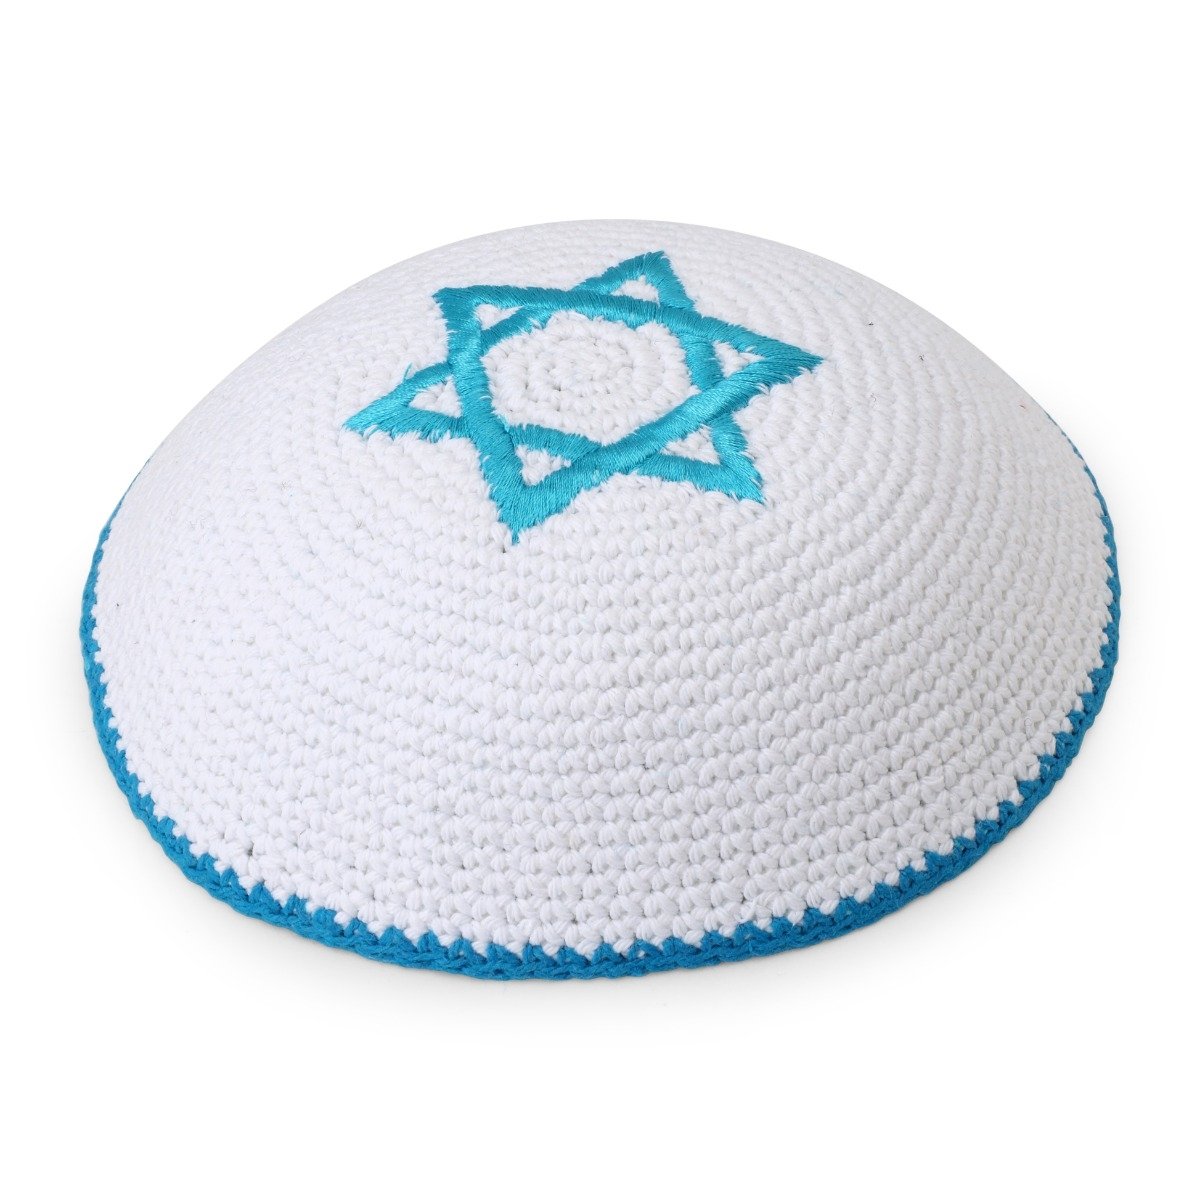 Embroidered and Knitted Kippah with Star of David - Choice of Color - 1